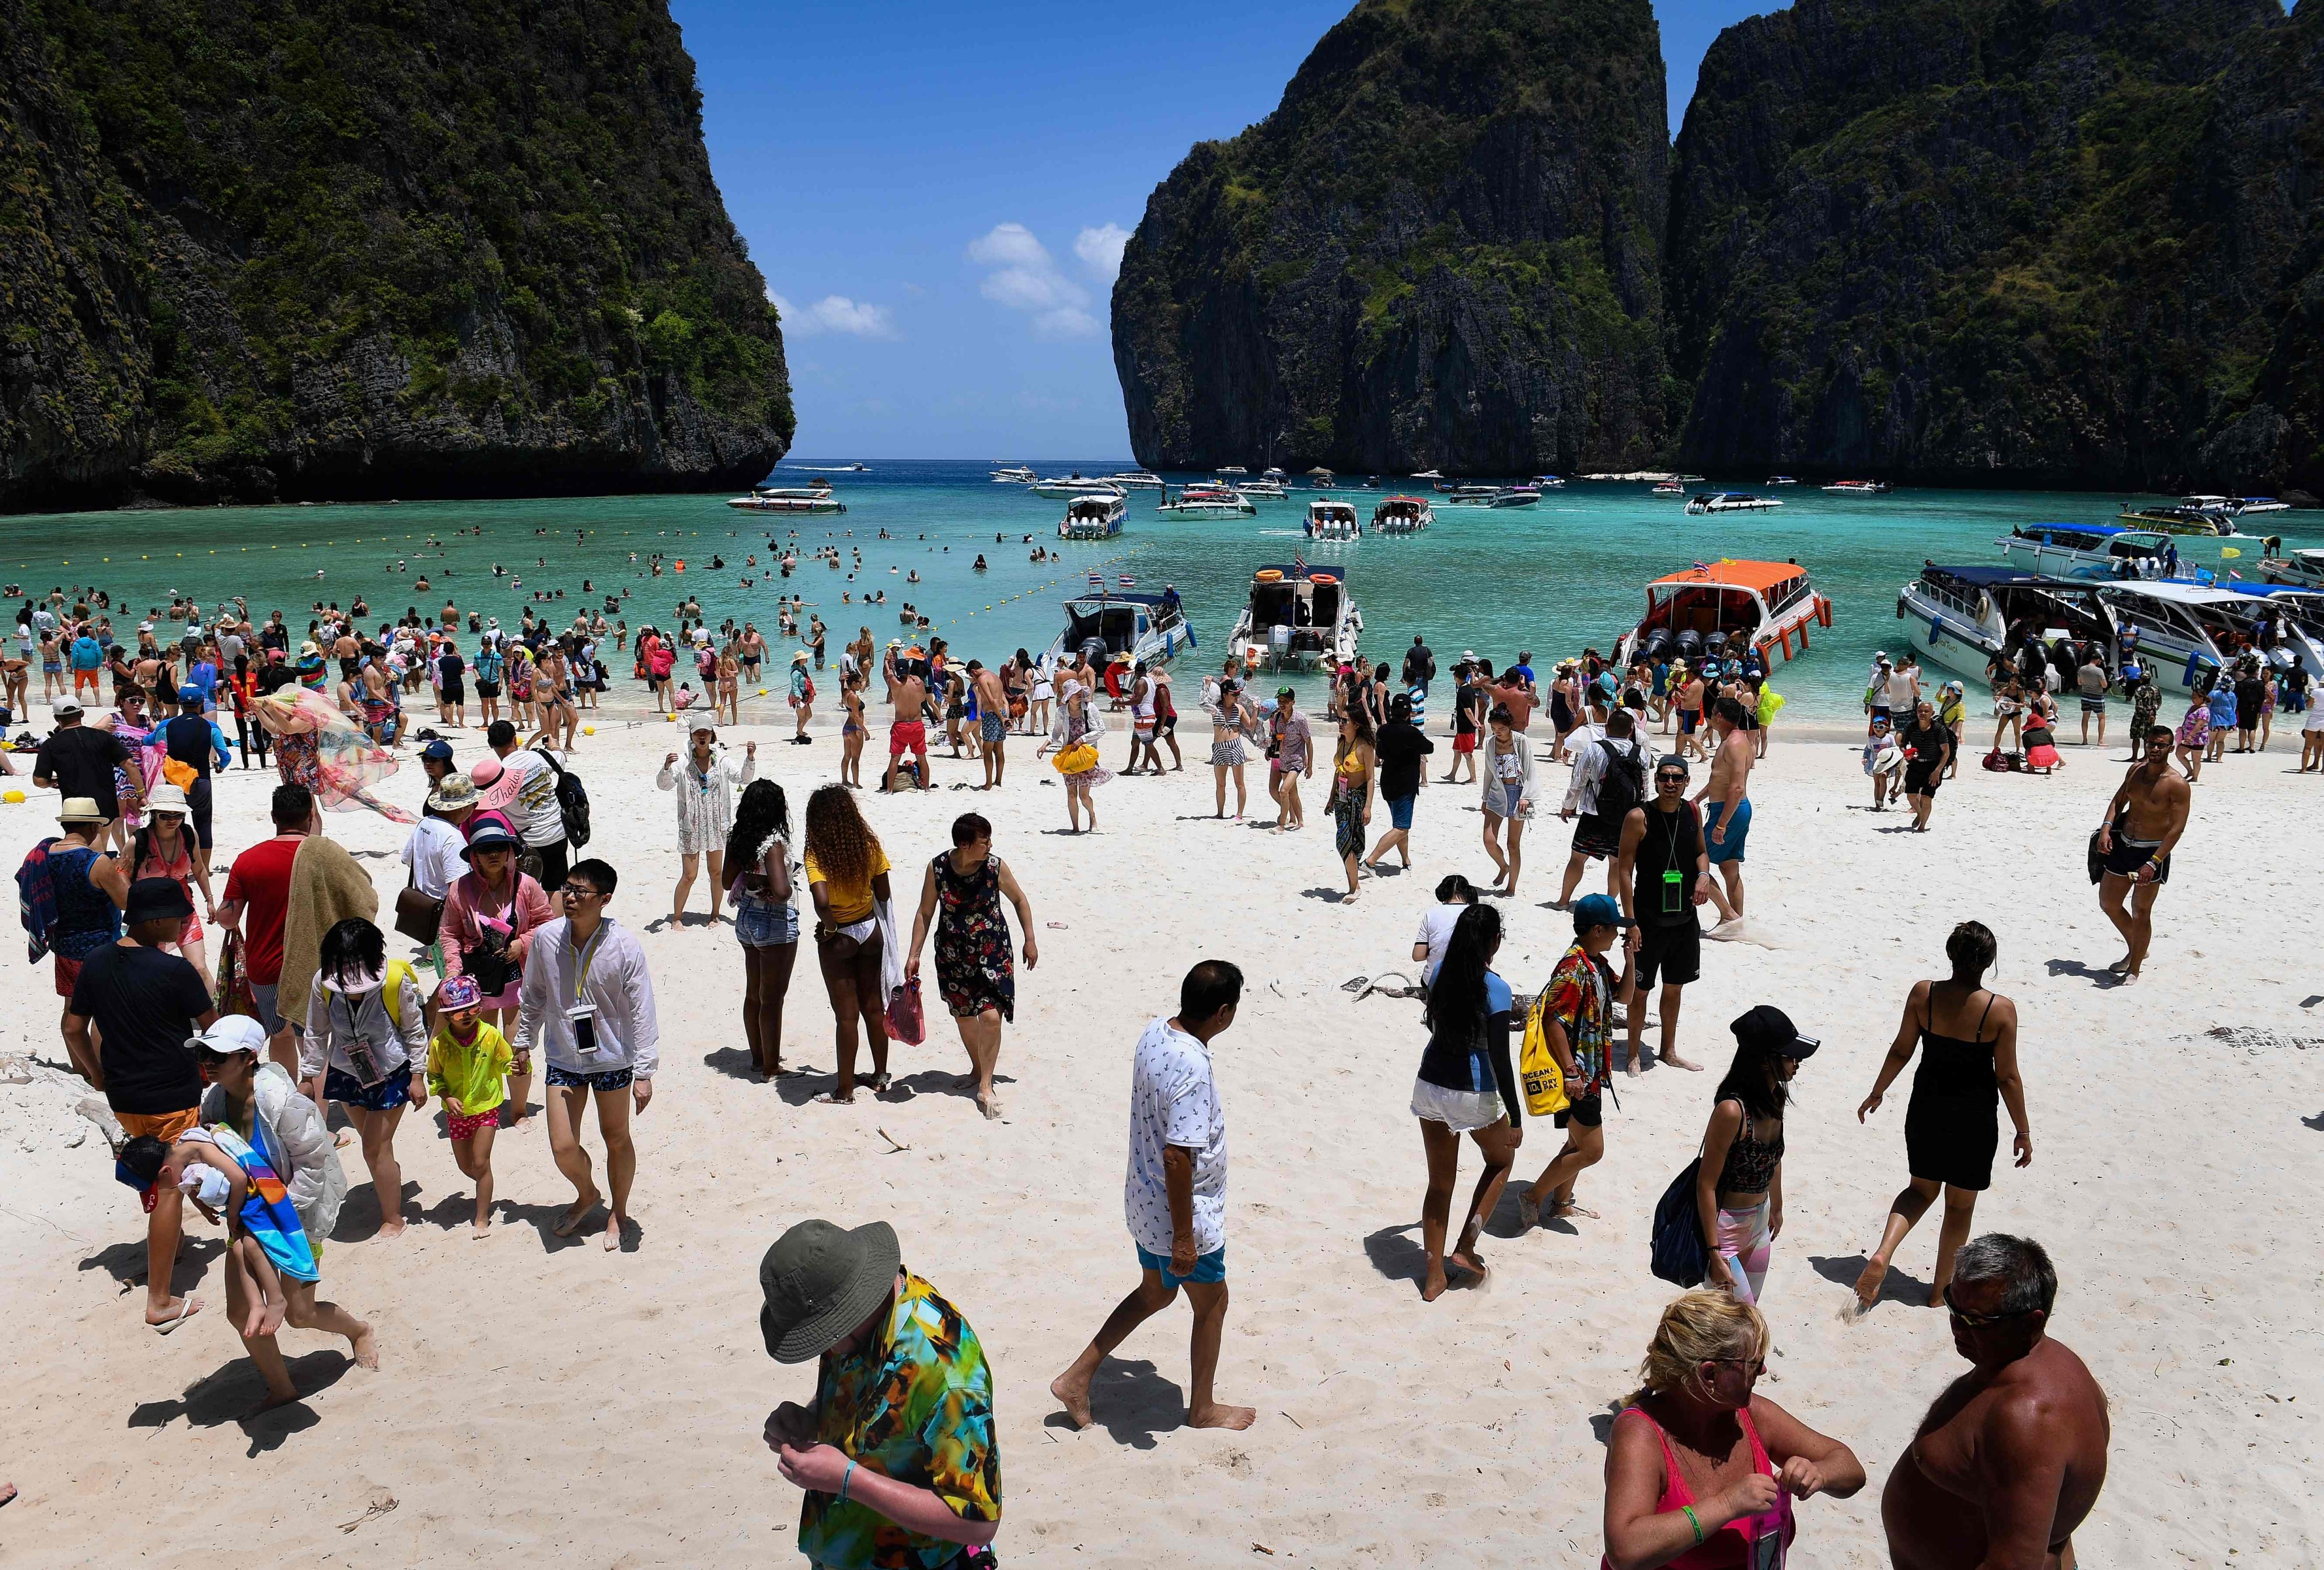 (FILES) In this file photo taken on April 9, 2018 shows a crowd of tourists on Maya Bay beach, on the southern Thai island of Koh Phi Phi. - More than two decades after Hollywood adventure drama &quot;The Beach&quot; was shot at Thailand&#39;s glittering Maya Bay, the Supreme Court in Bangkok on September 13, 2022 ordered the kingdom&#39;s forestry department to undertake further environmental rehabilitation work. (Photo by Lillian SUWANRUMPHA / AFP)